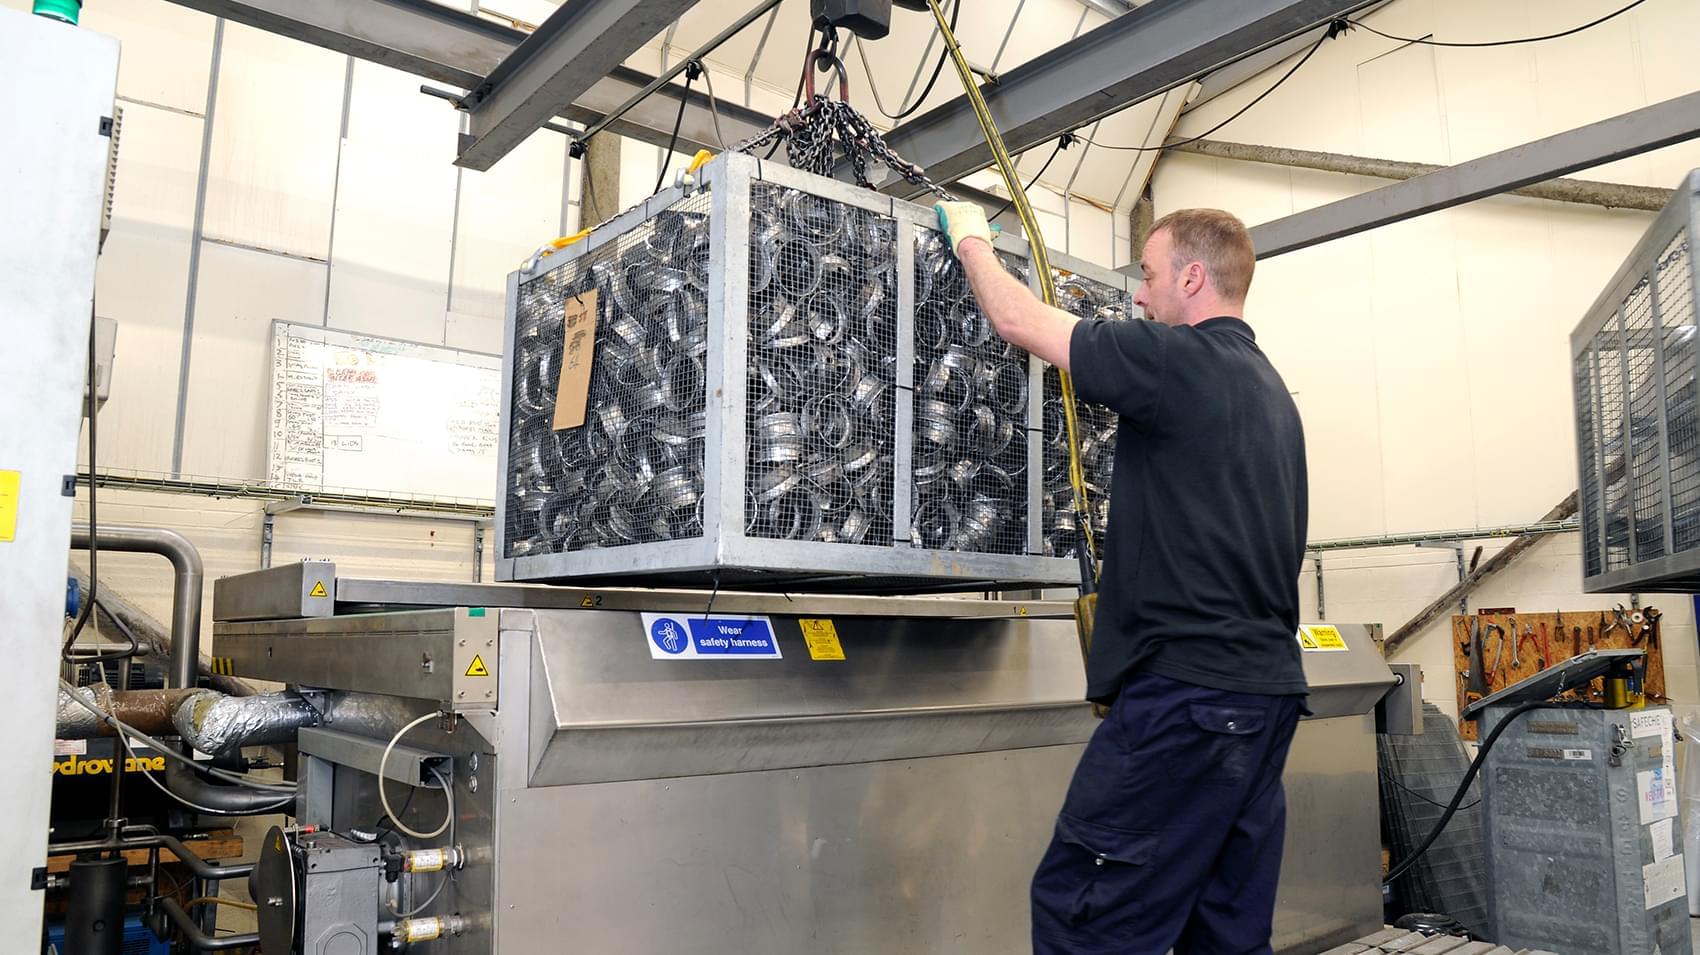 Vapour degreasing and solvent degreasing expertise at midland deburr